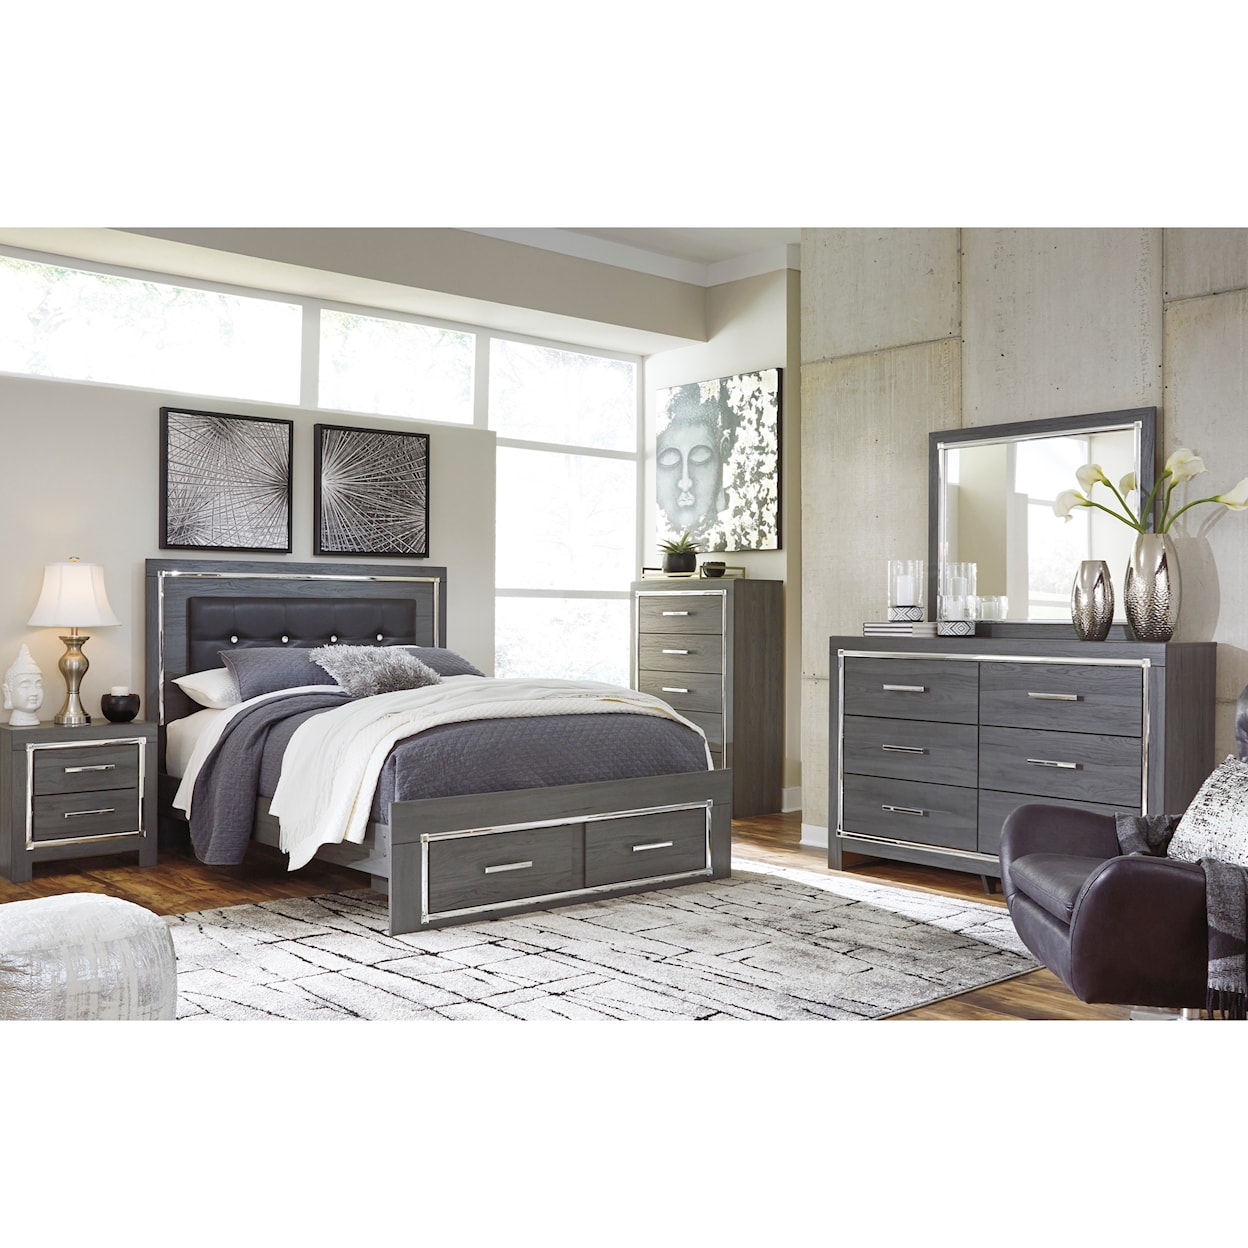 Signature Design by Ashley Lodanna Queen Bedroom Group